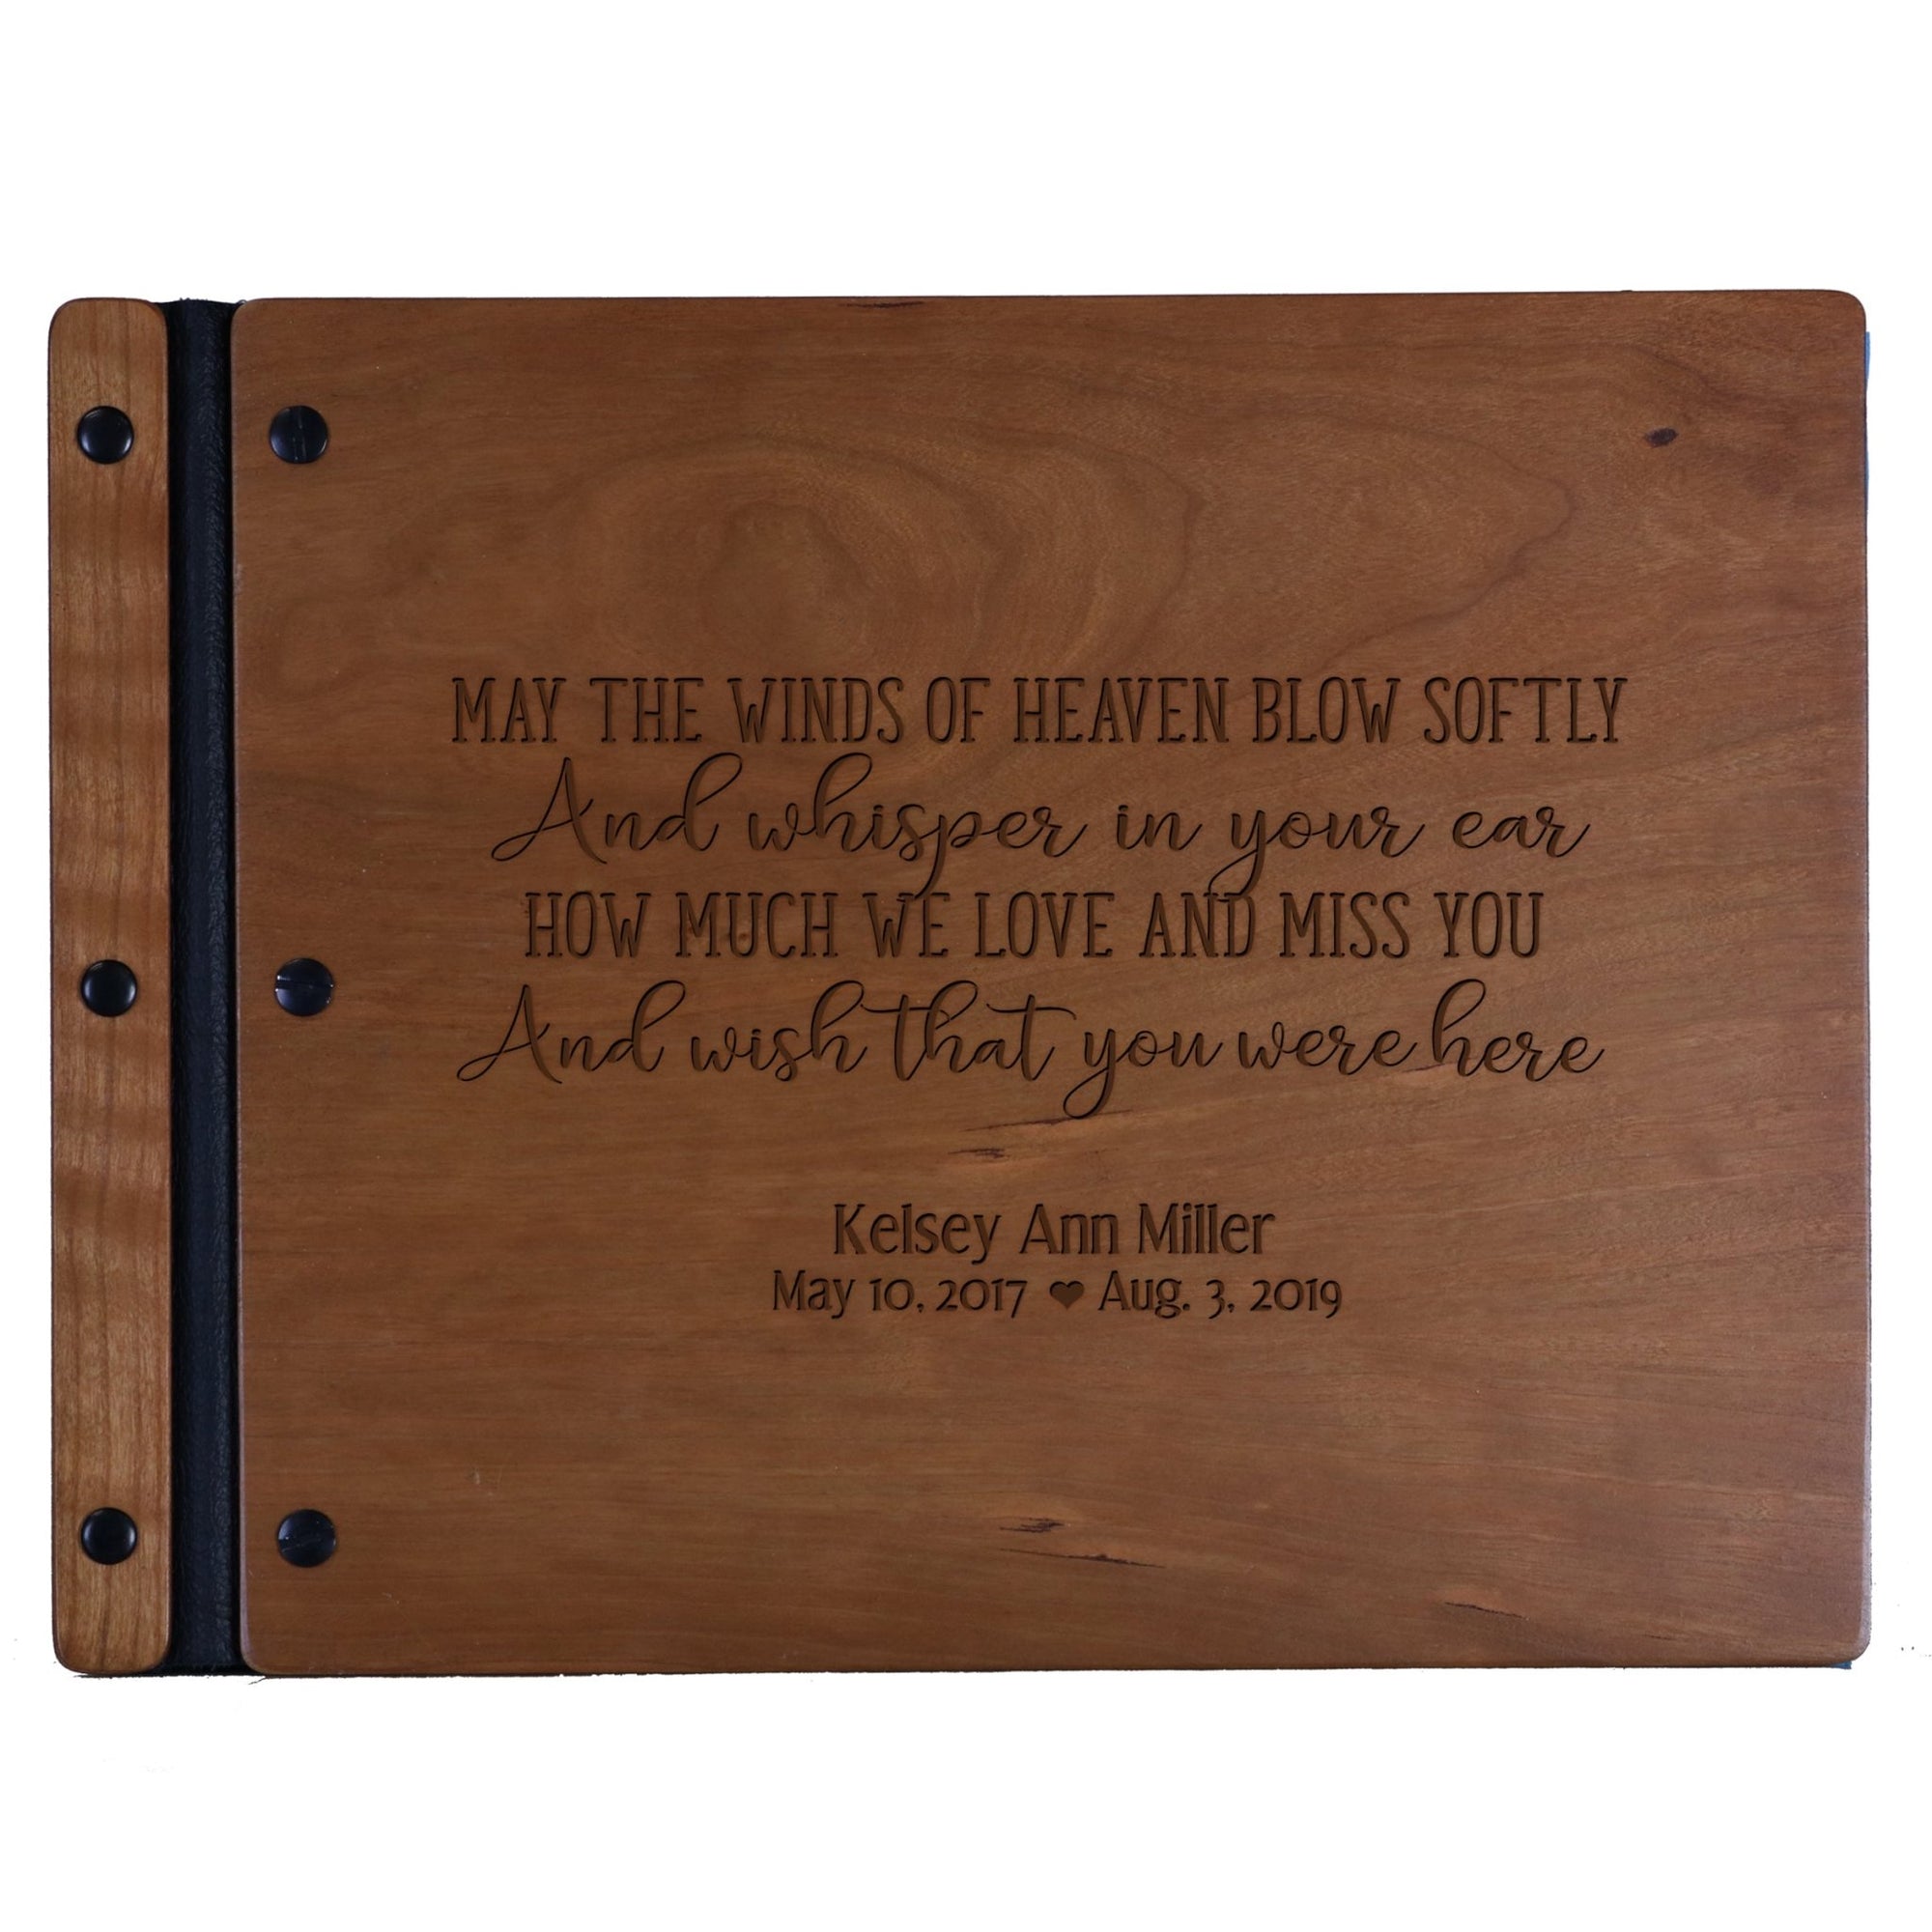 Personalized Memorial Guest Book - May The Winds - LifeSong Milestones